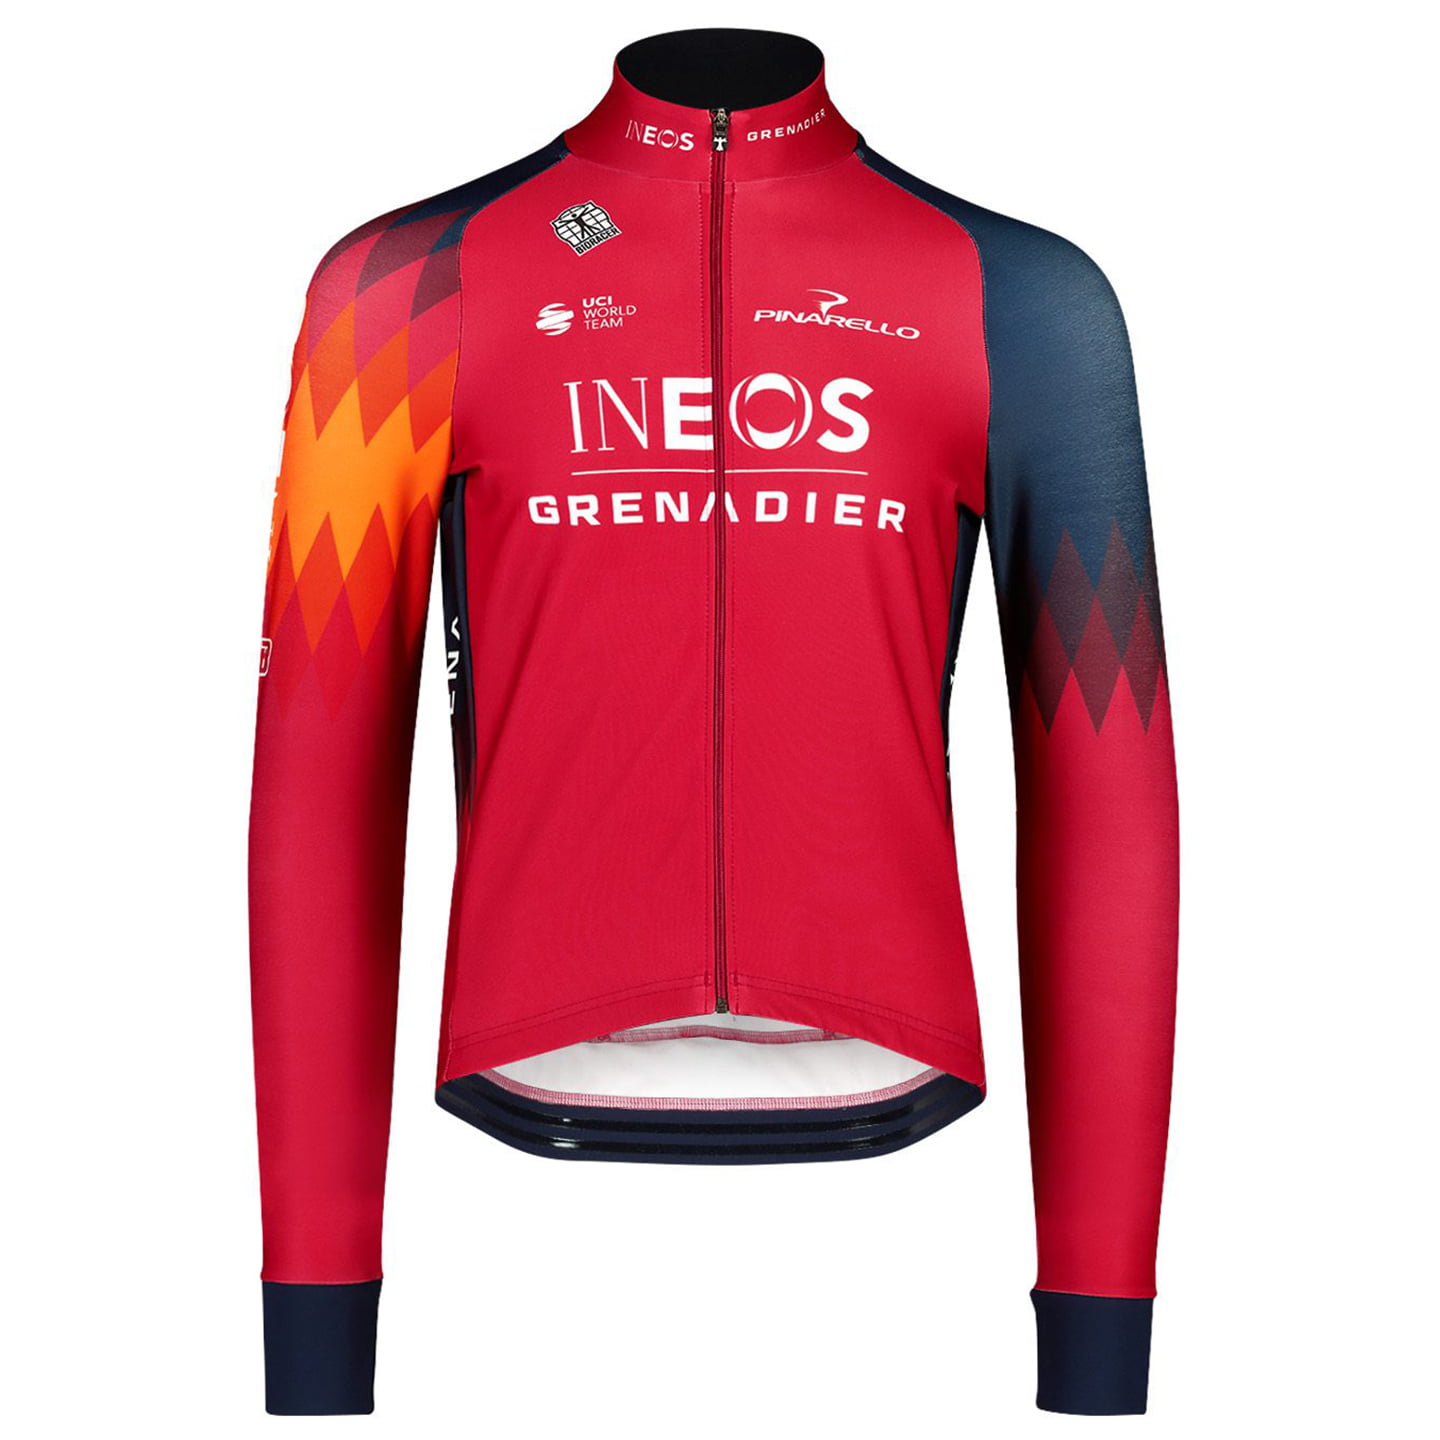 INEOS Grenadiers Jersey Jacket Icon Tempest 2023 Jersey / Jacket, for men, size L, Cycle jacket, Cycle gear